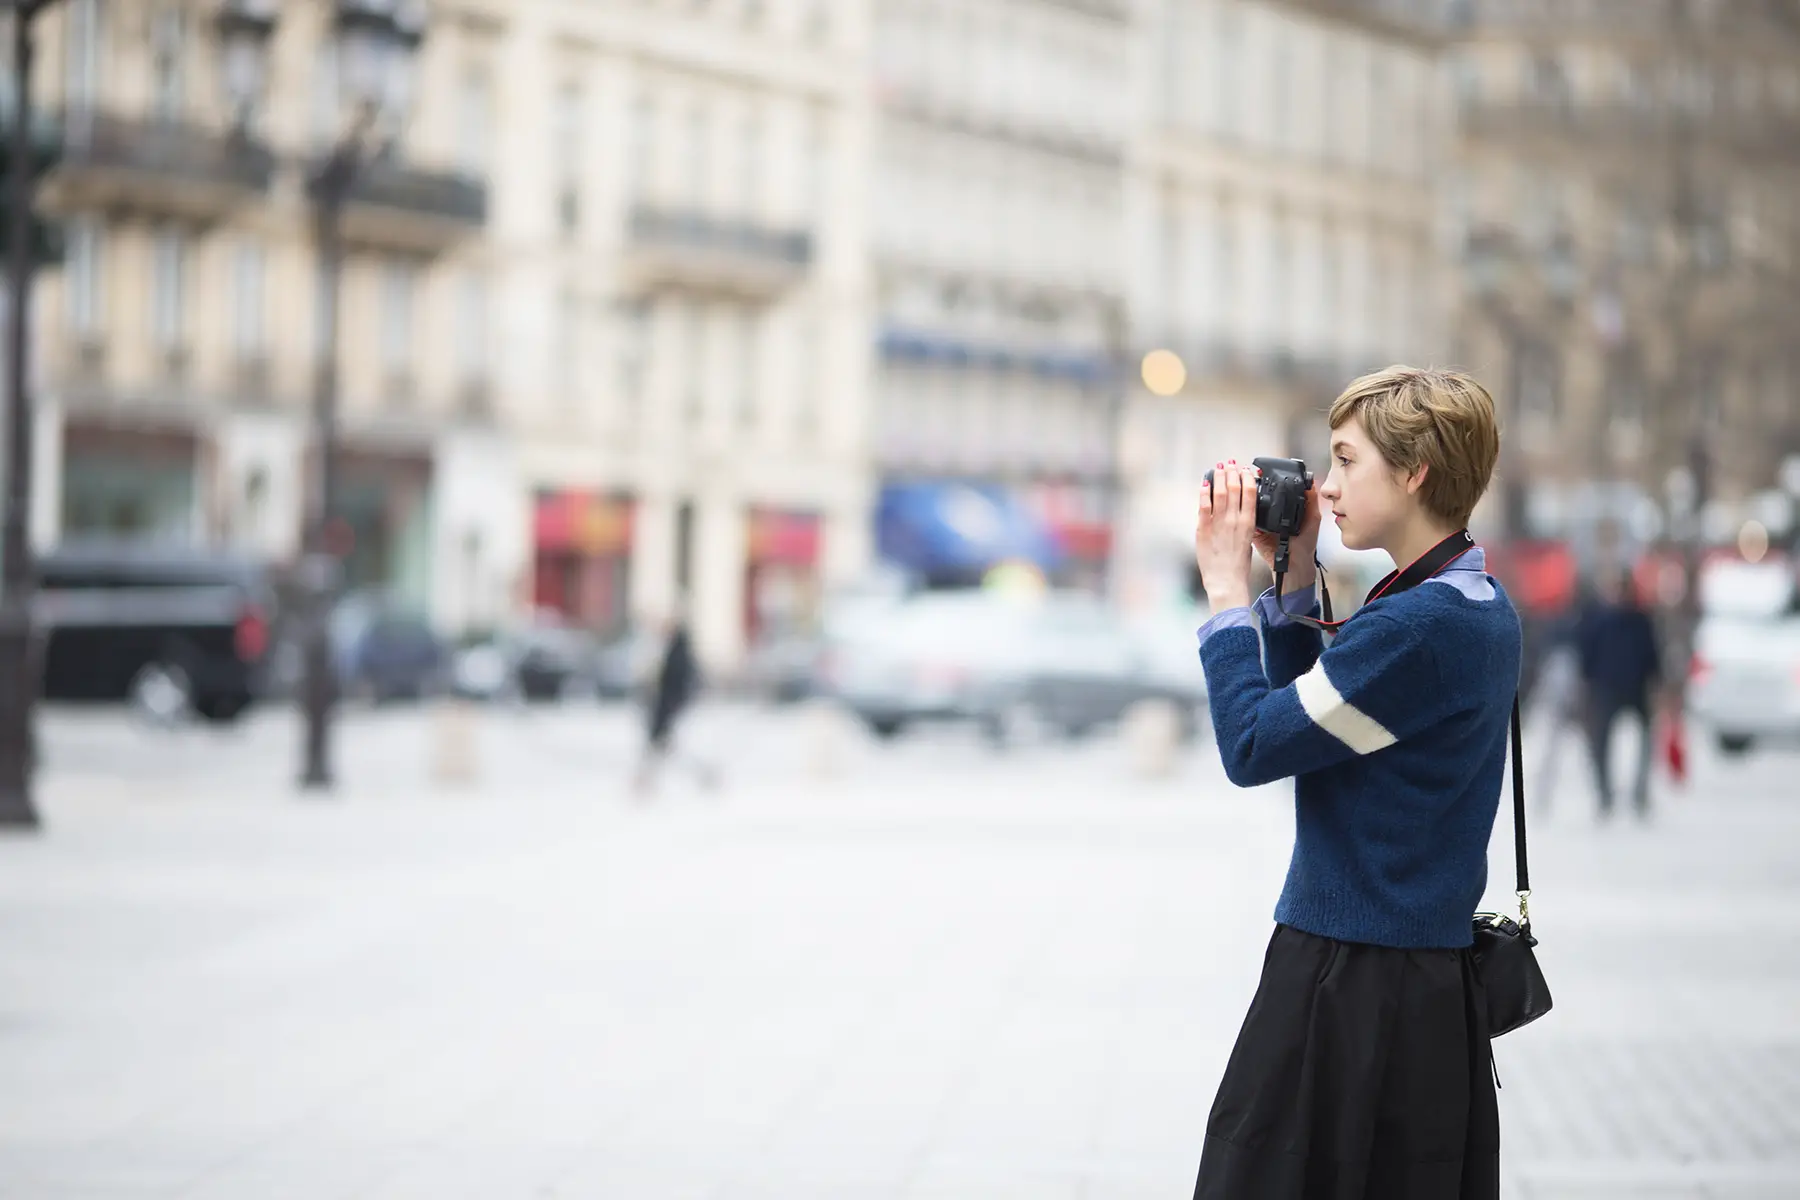 A photographer taking a picture against an out-of-focus background